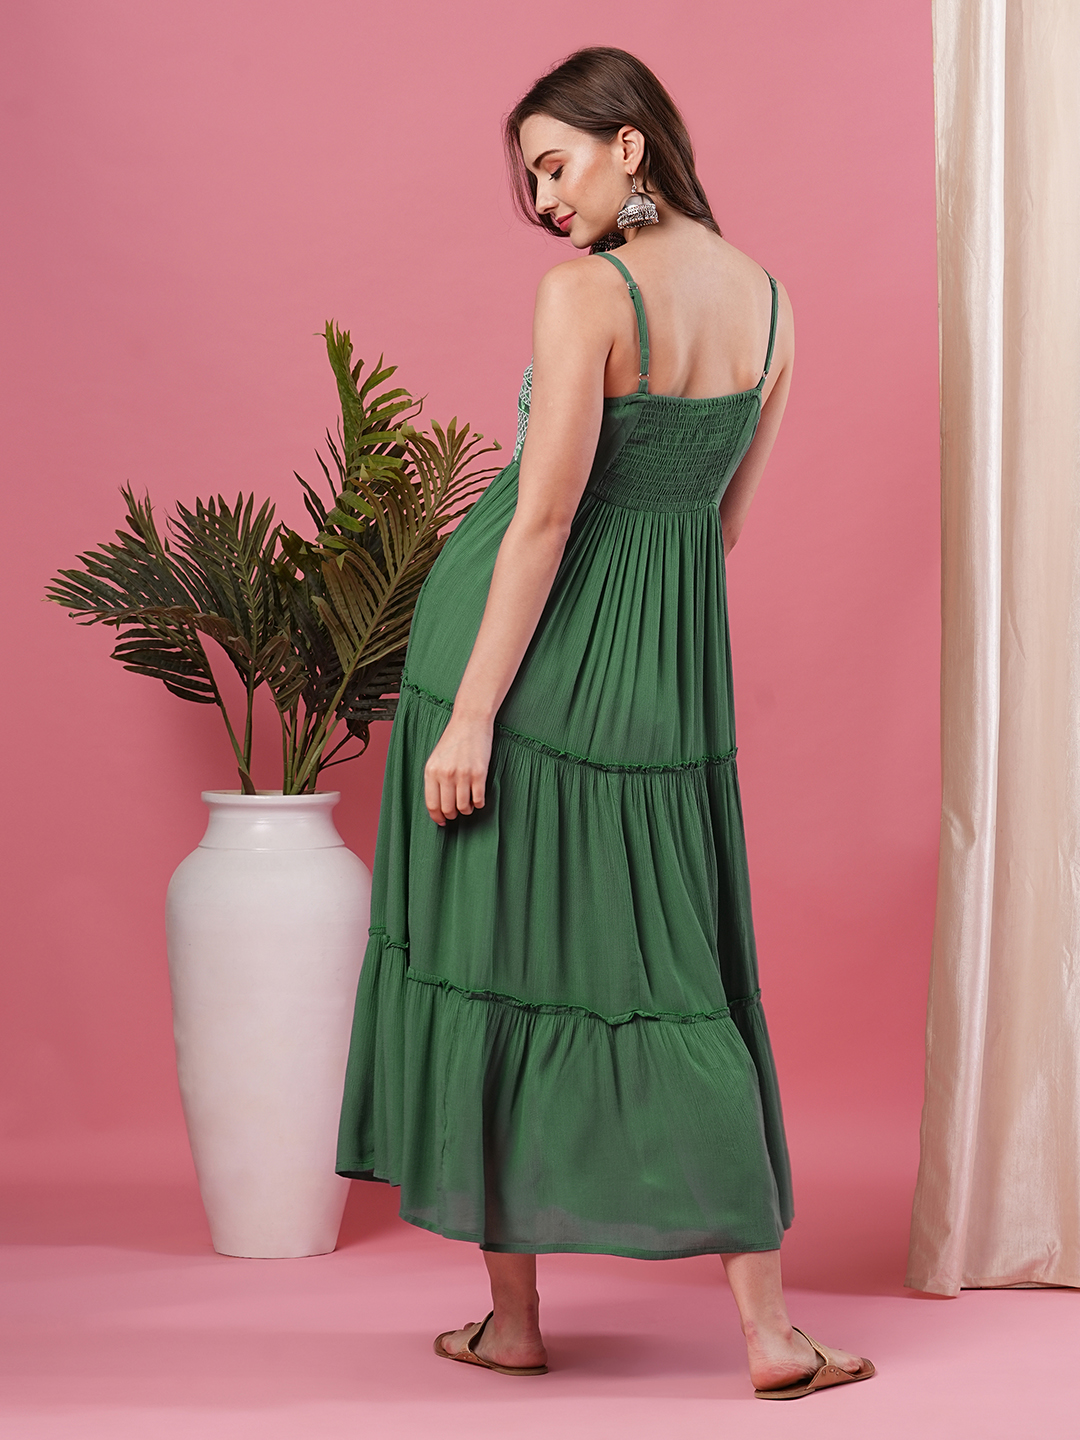 Globus Women Green Strappy Embroidered Yoke Flared Tiered A-Line Midi Dress